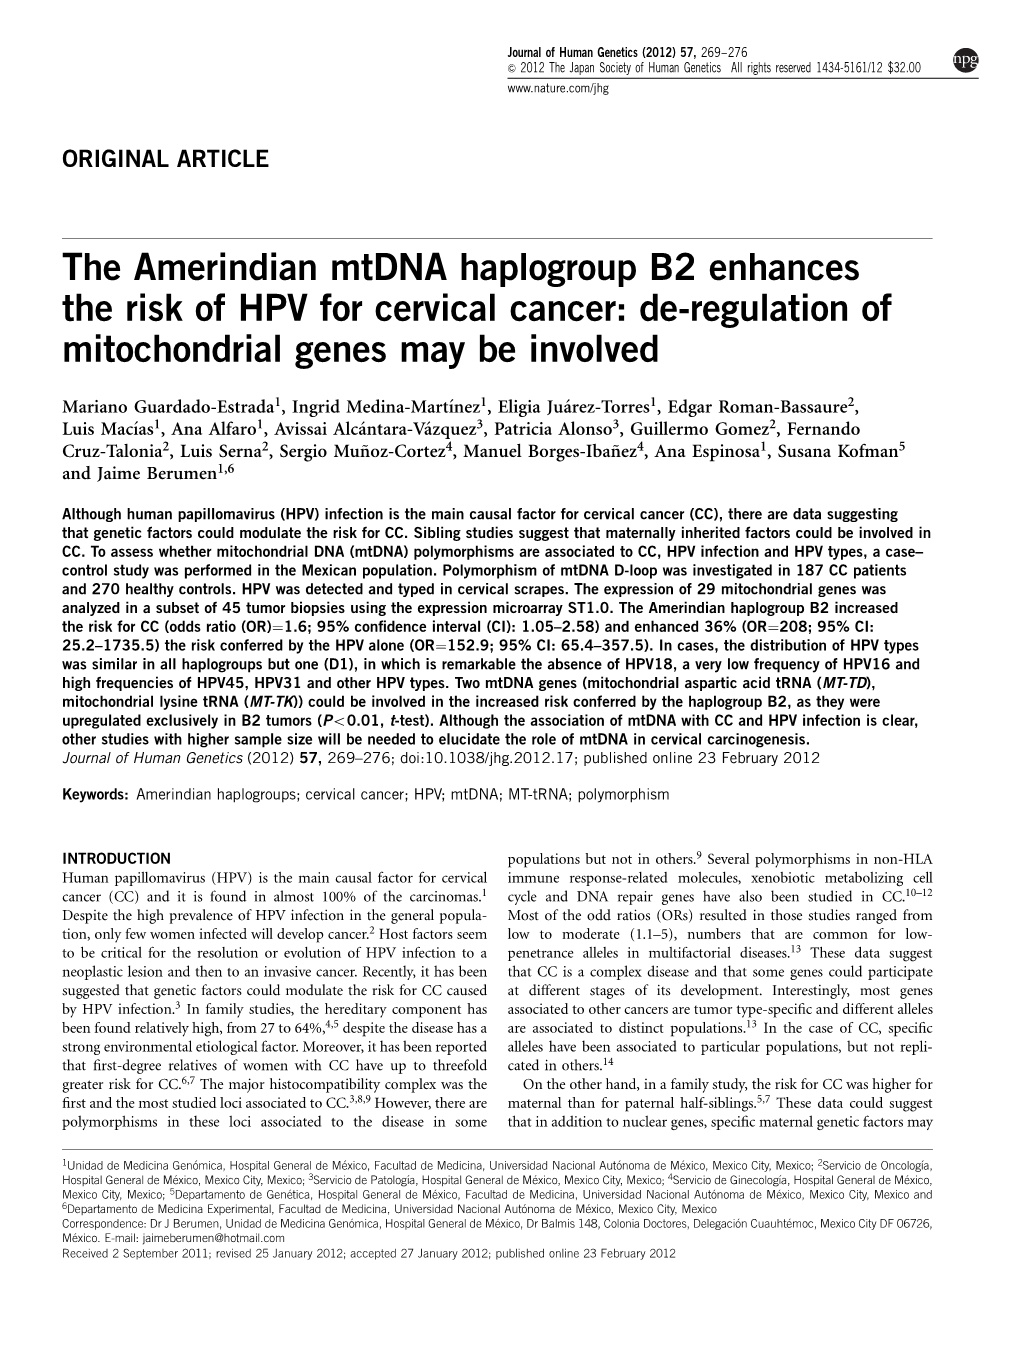 The Amerindian Mtdna Haplogroup B2 Enhances the Risk of HPV for Cervical Cancer: De-Regulation of Mitochondrial Genes May Be Involved